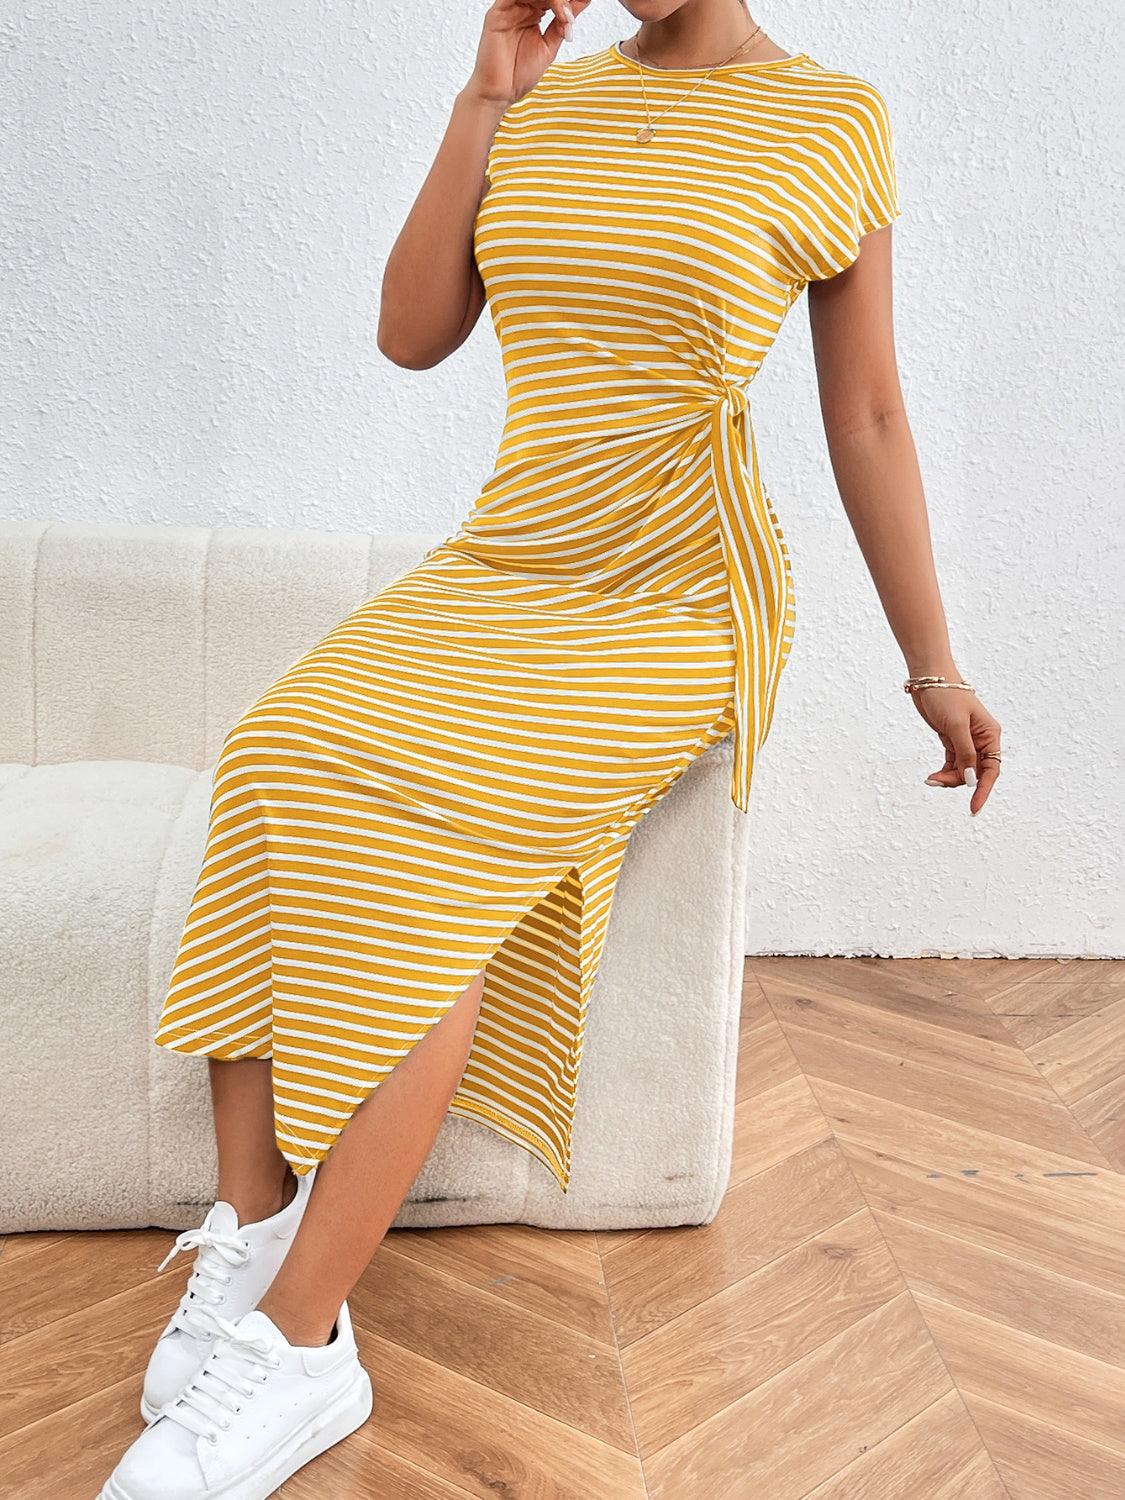 Tied Striped Tee Dress in 6 Colors - Olive Ave